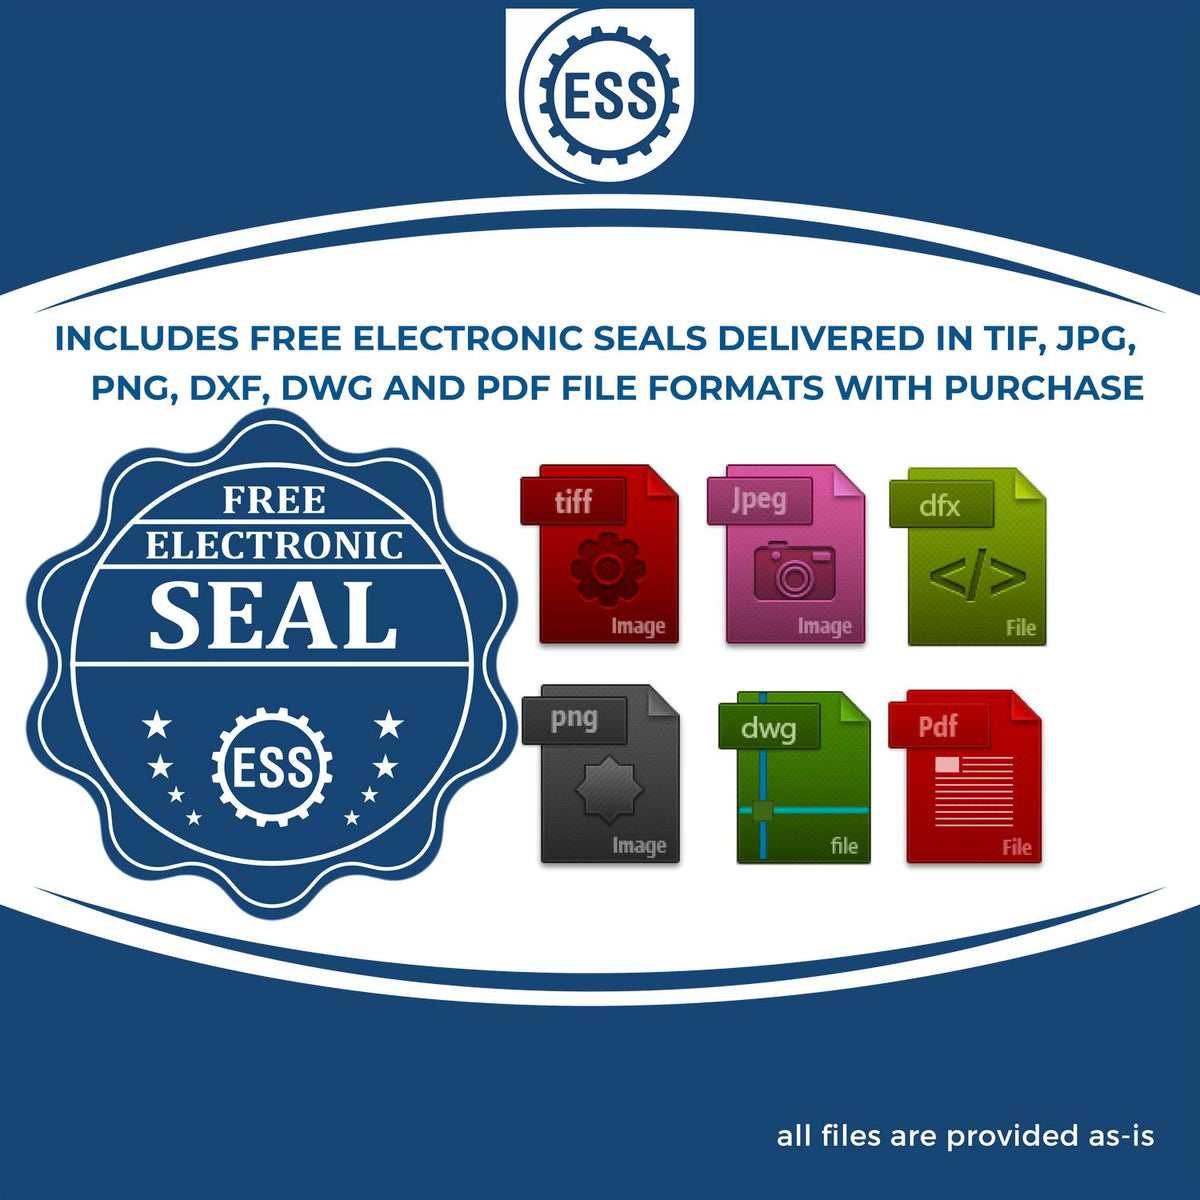 An infographic for the free electronic seal for the Gift West Virginia Architect Seal illustrating the different file type icons such as DXF, DWG, TIF, JPG and PNG.